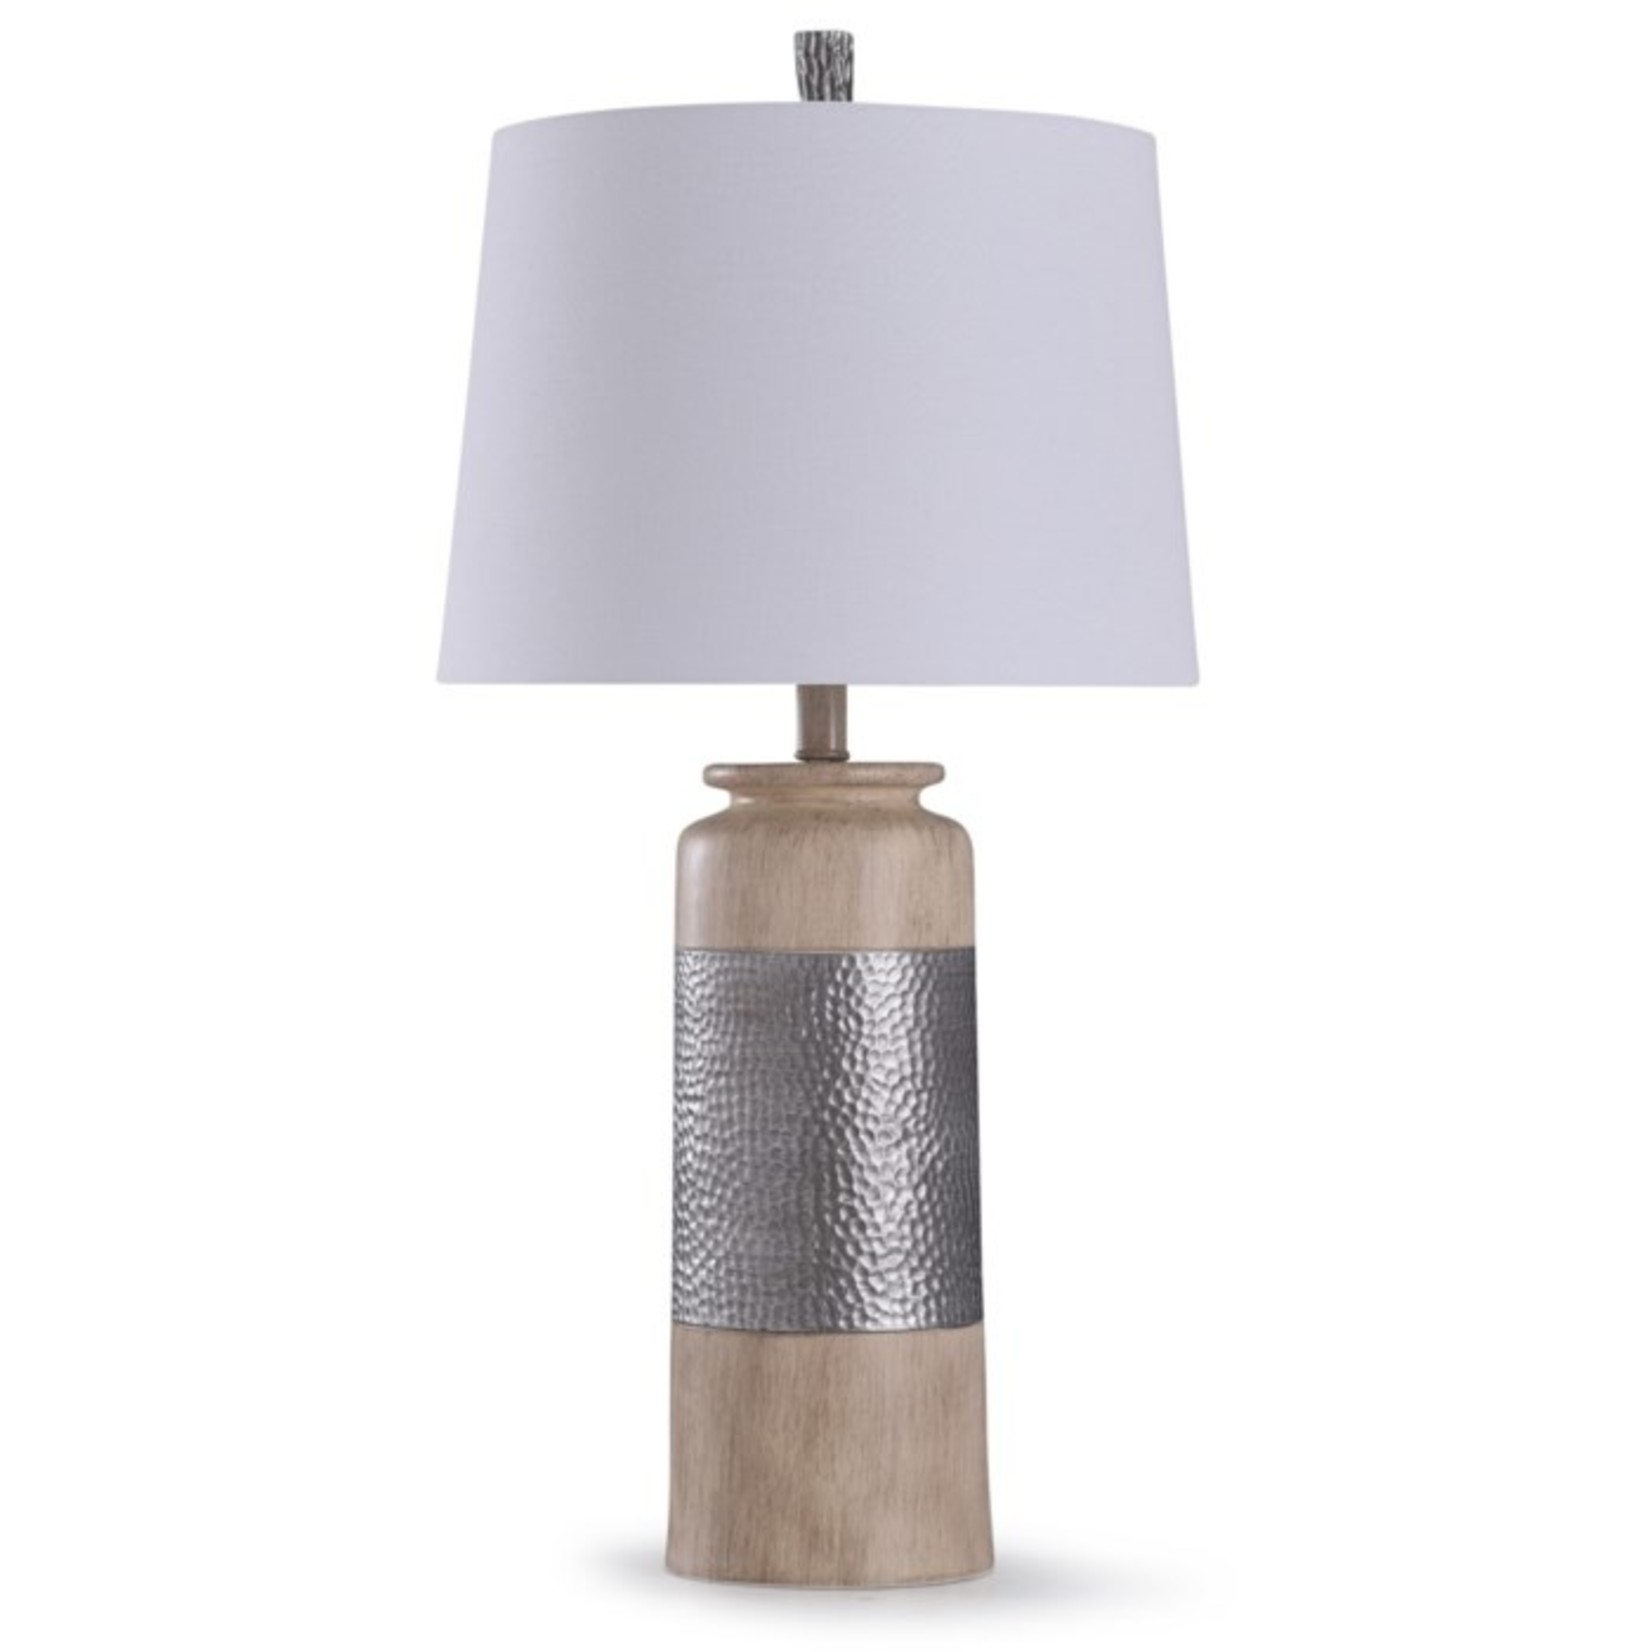 Haverhill Hammered Table Lamp